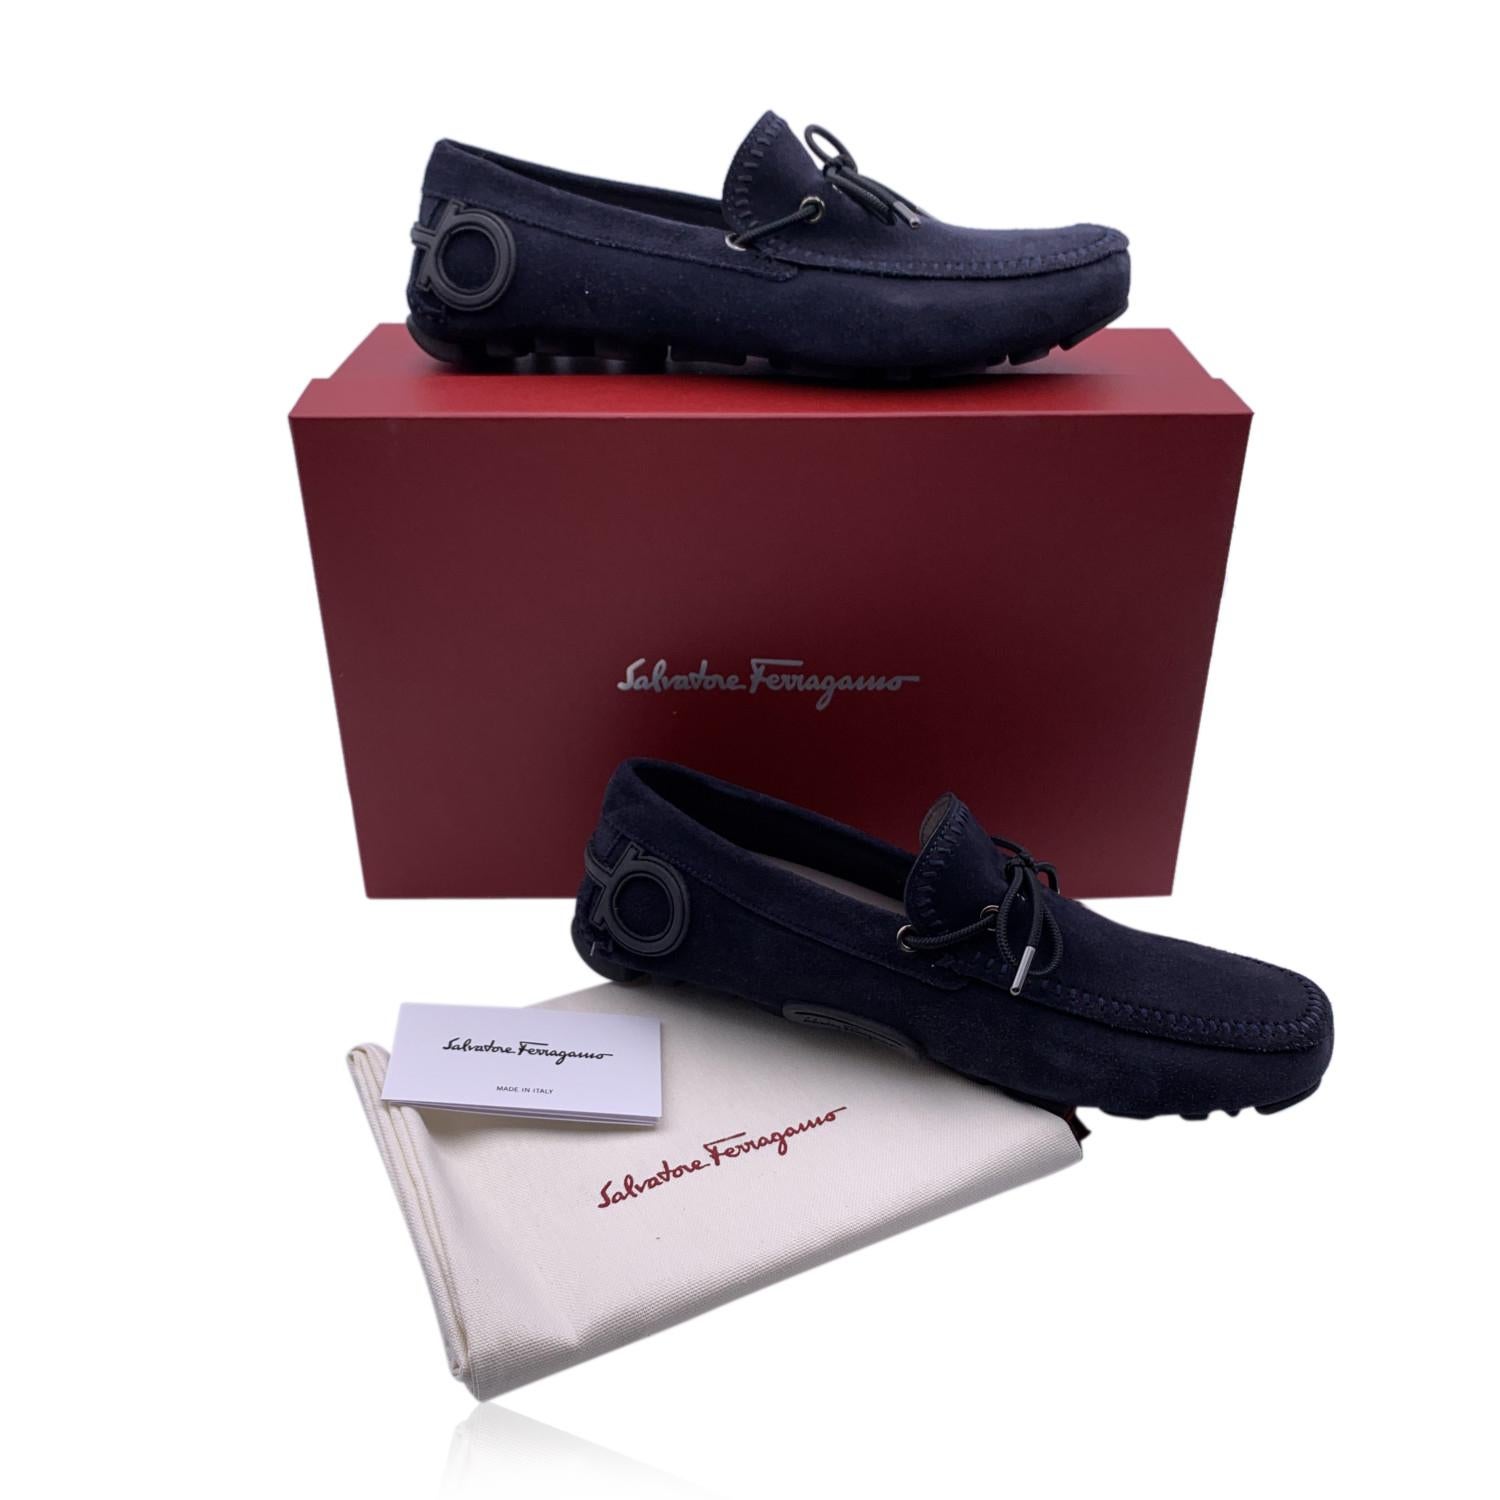 Beautiful Salvatore Ferragamo 'Atlante' Men Moccassins Loafers Shoes. Crafted in dark blue suede. They feature a square toe, drawstring detail on the toes and slip-on design. Rubber sole. Made in Italy. Size: US 7 EEE- EU 41 EEE (The size shown for